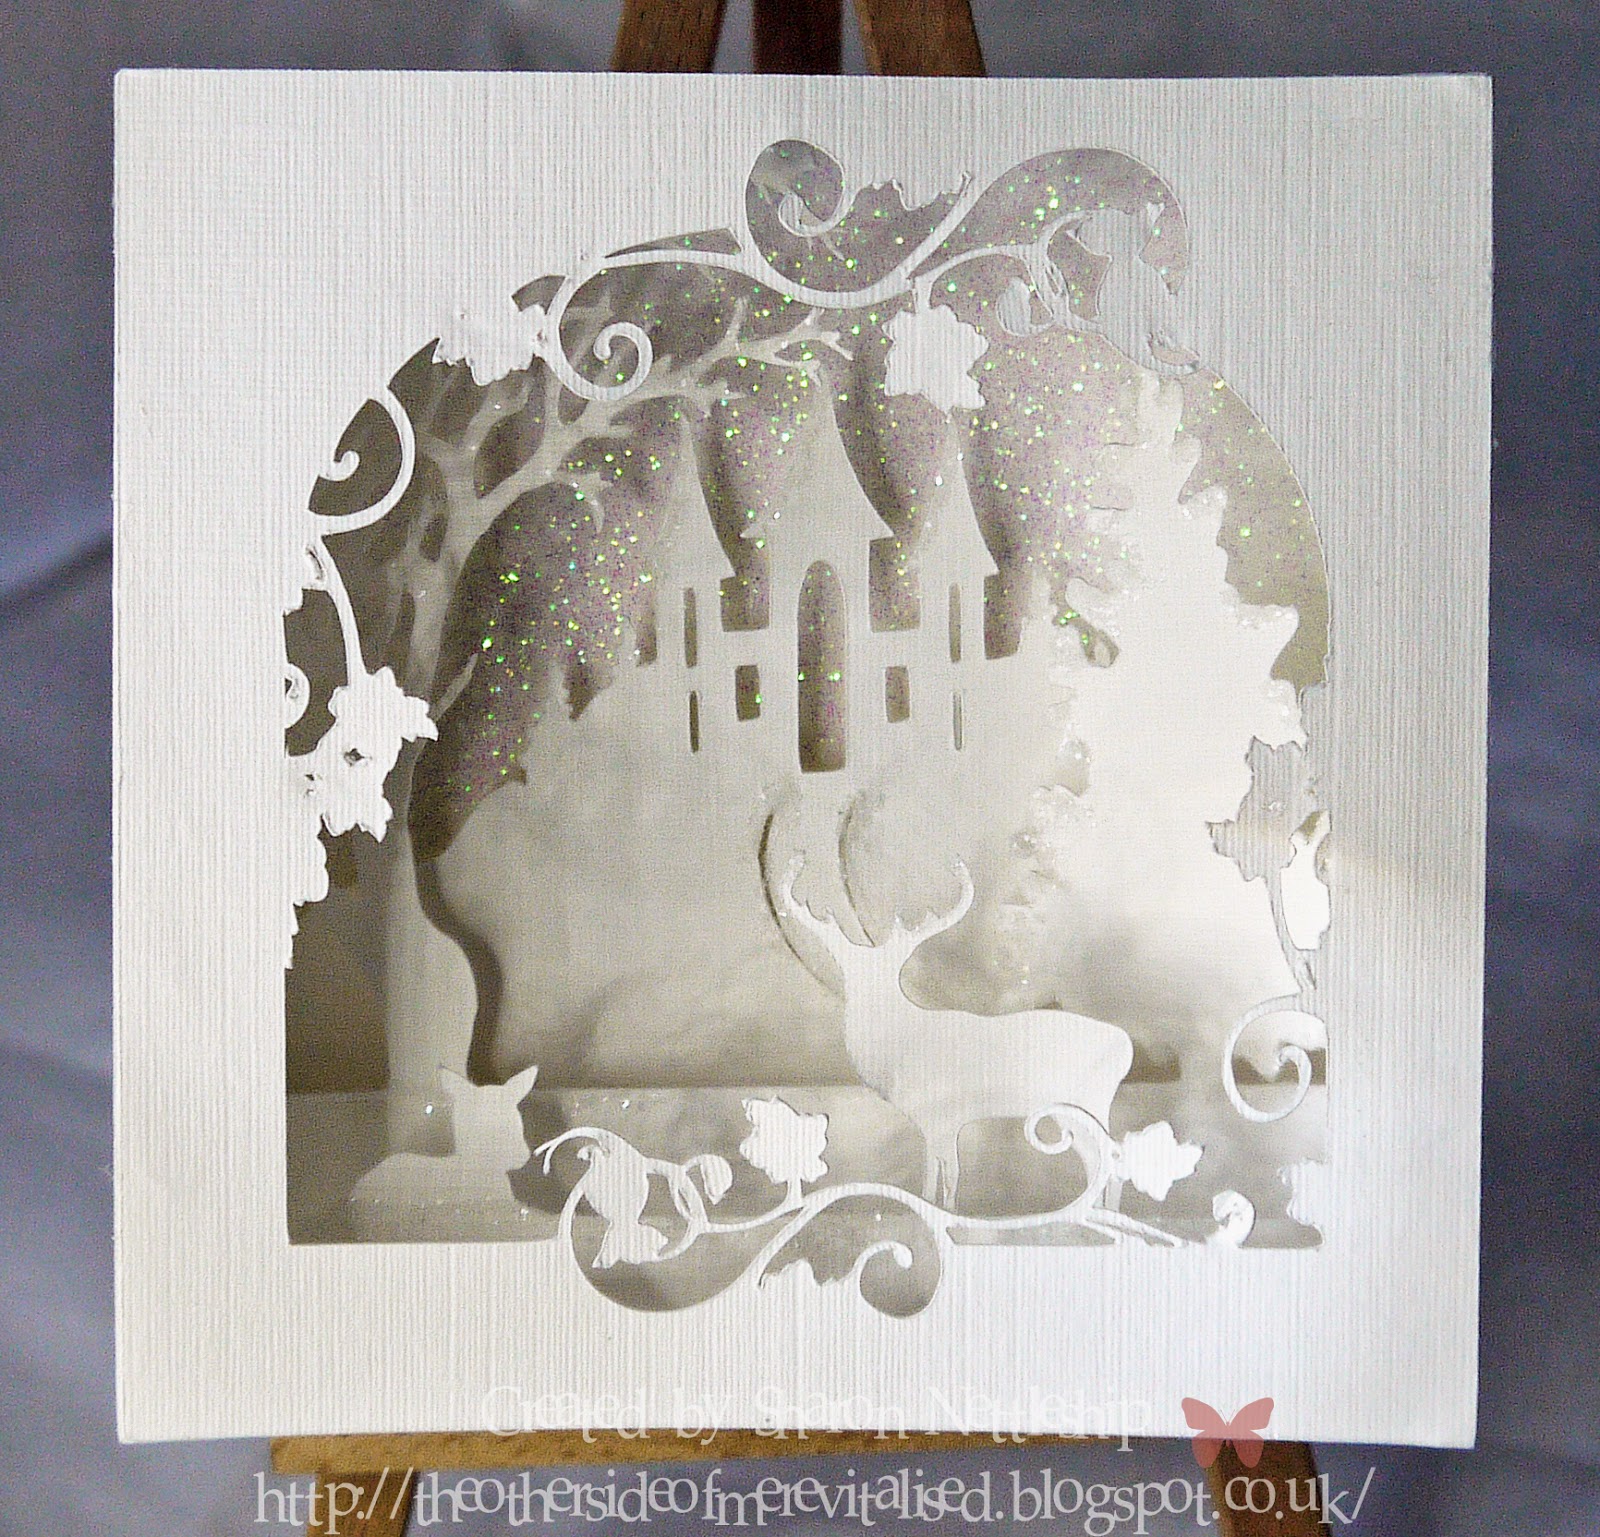 Download The Other Side Of Me Crafty Svg Designs 3d Layered Christmas Card Snapdragon Snippets